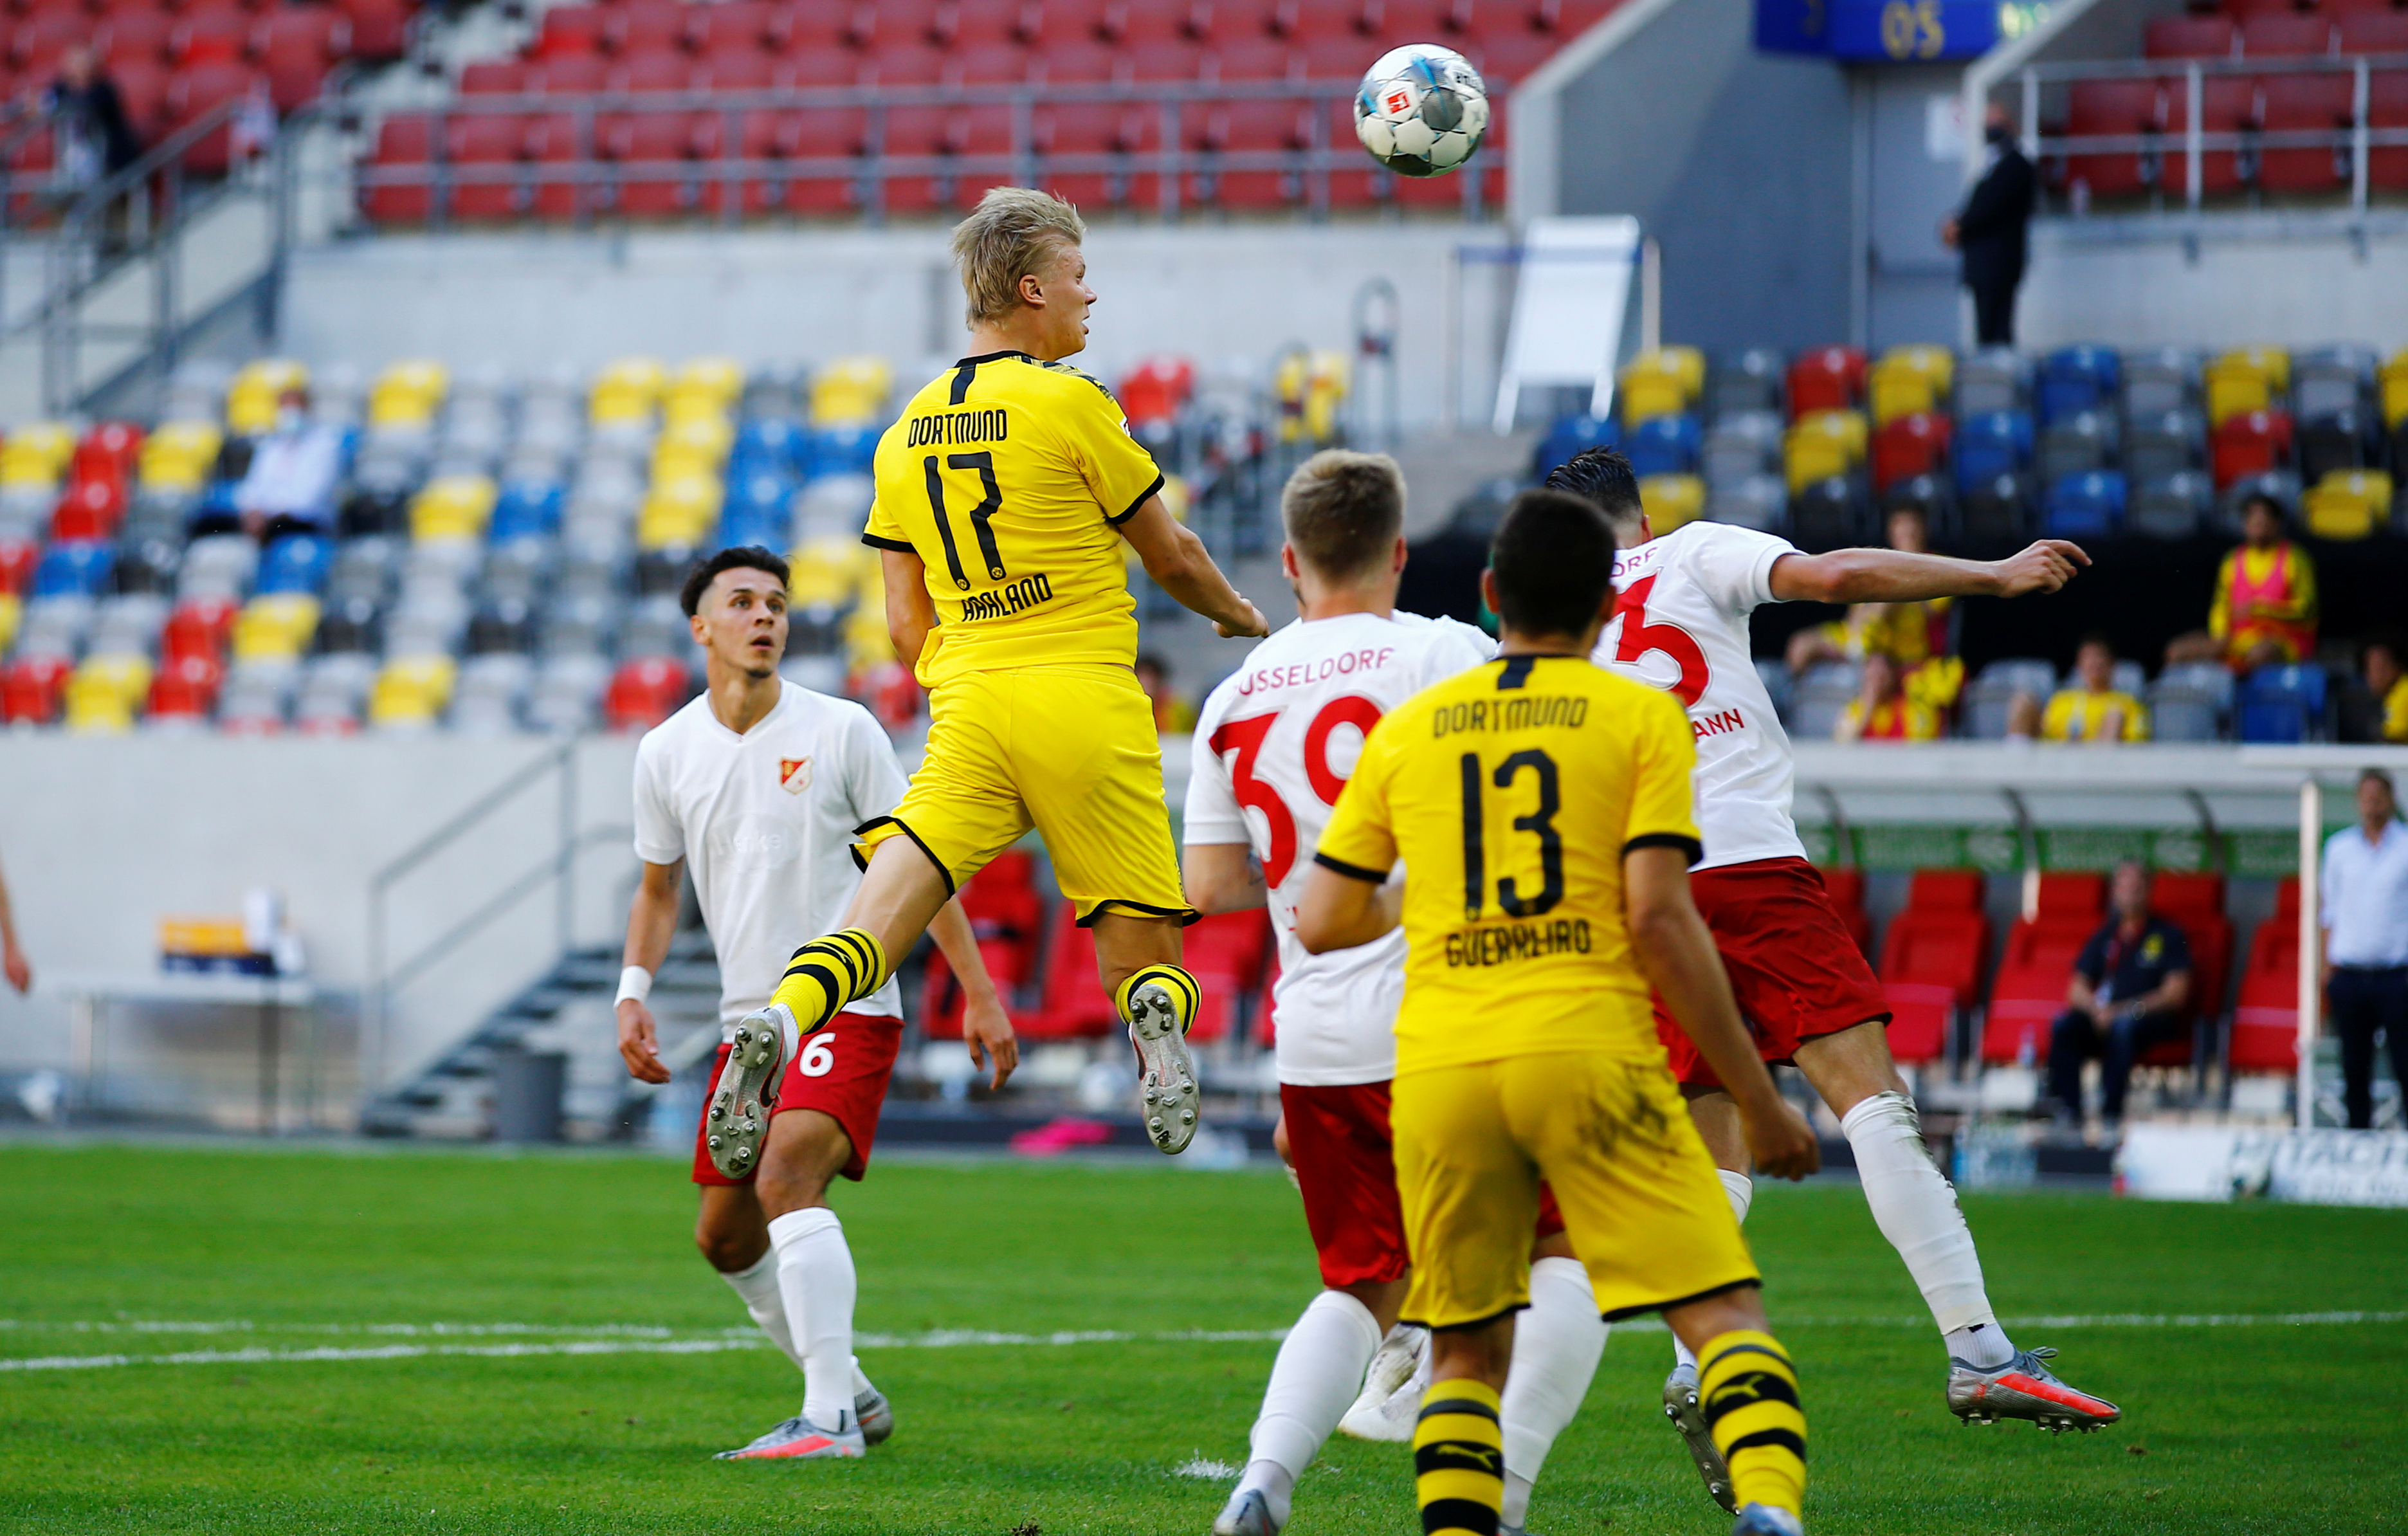 Borussia Dortmund's Erling Braut Haaland scores their first goal, as play resumes behind closed doors following the outbreak of the coronavirus disease (COVID-19) during the Bundesliga match between Fortuna Dusseldorf and Borussia Dortmund, at Merkur Spiel-Arena, in Dusseldorf, Germany, on June 13, 2020. Photo: Reuters